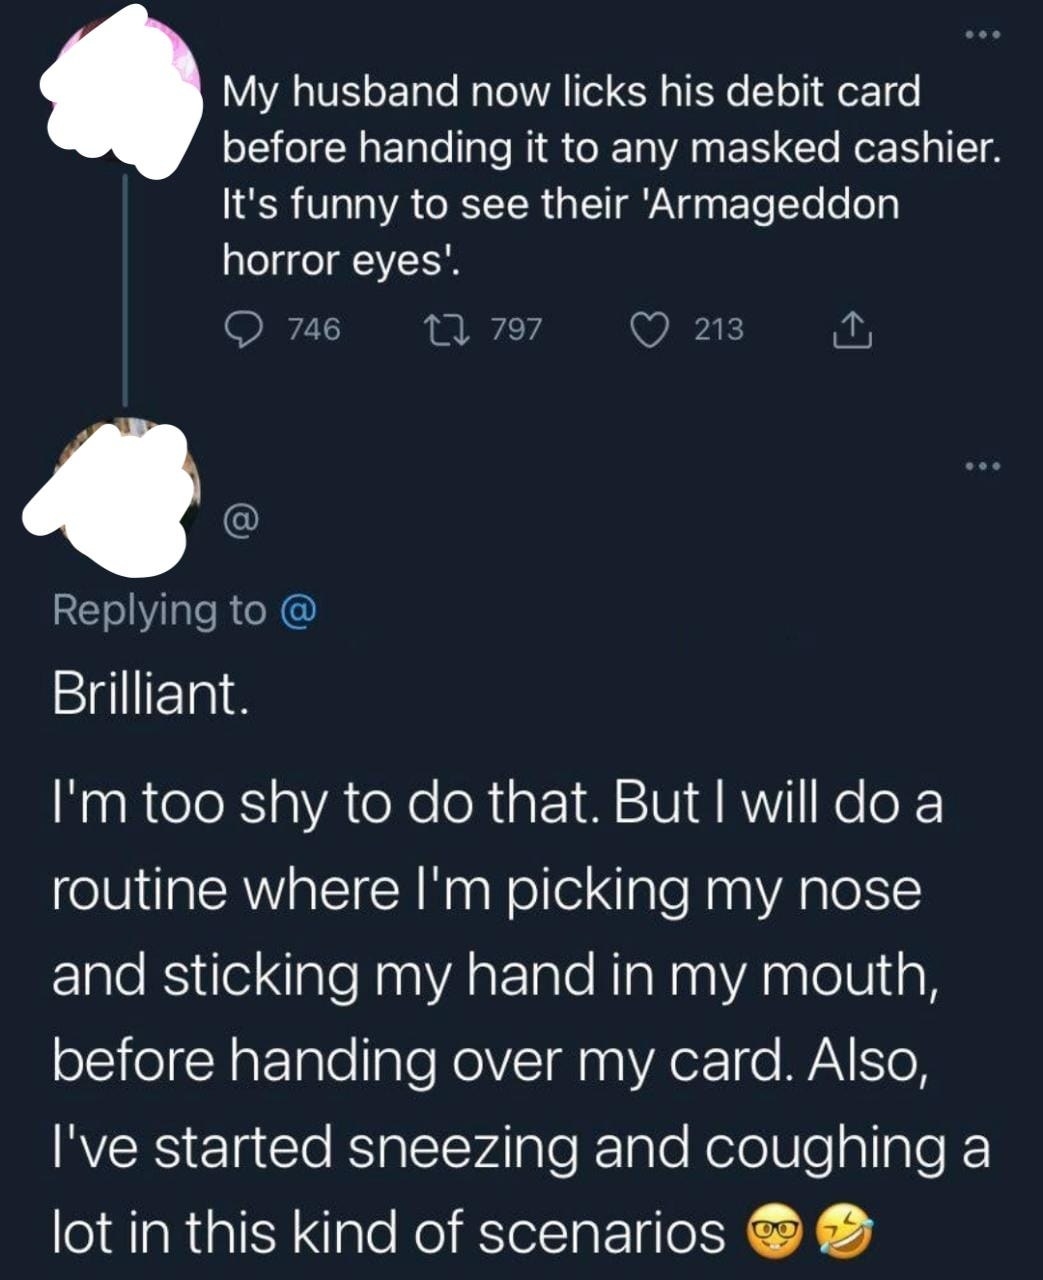 people swap stories about licking their credit cards and picking their nose before giving their card to a cashier